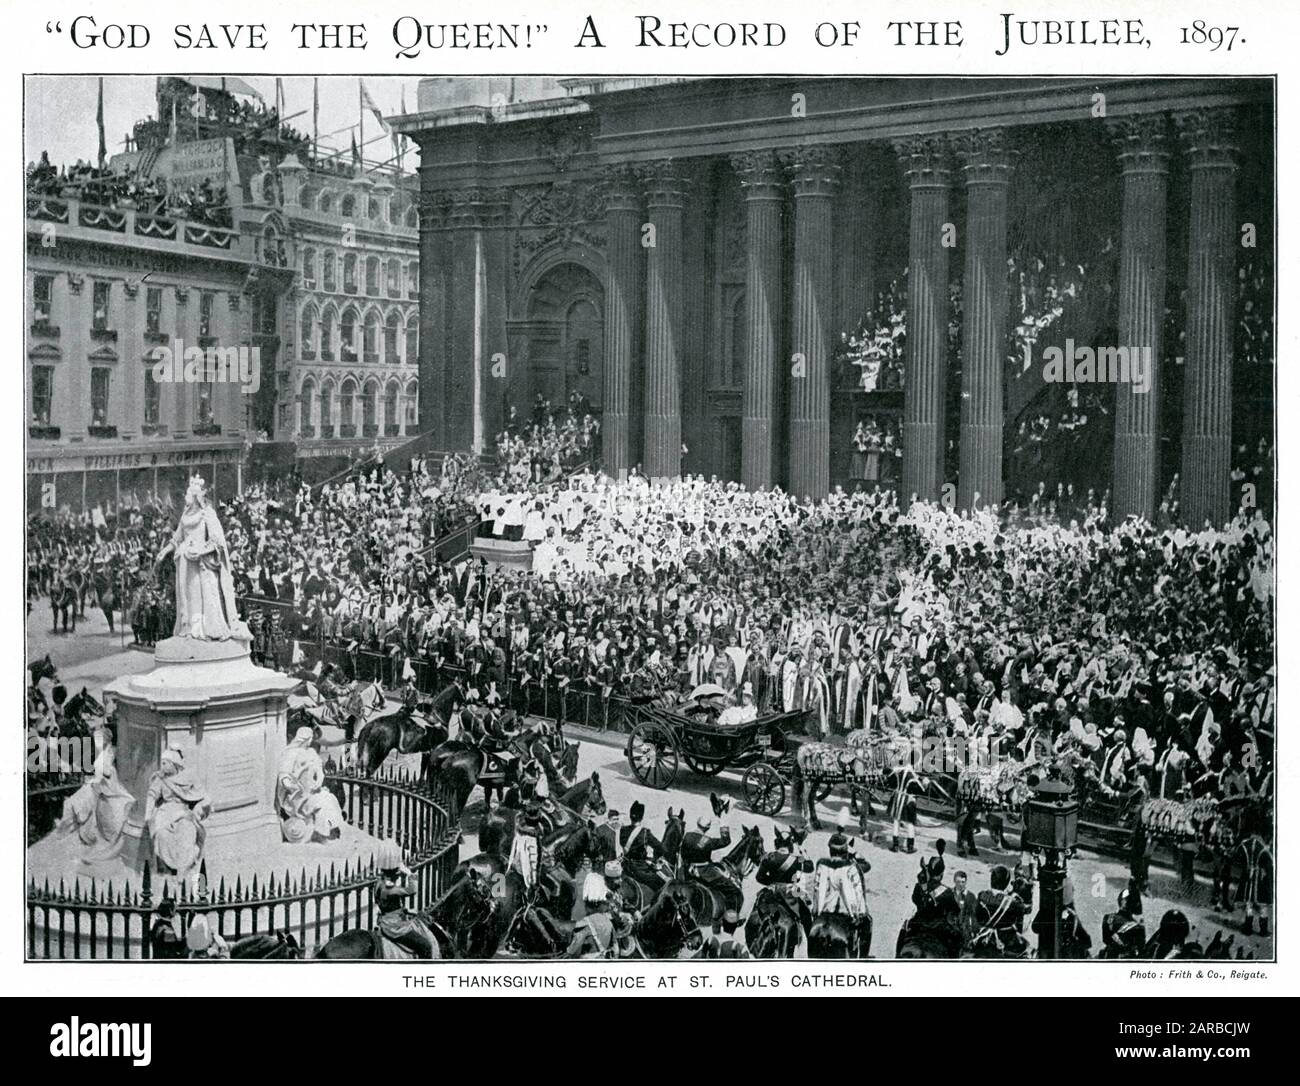 Thanksgiving service ceremony at St. Paul's Cathedral, London. Queen Victoria in the royal carriage at the foot of the steps.     Date: 22 June 1897 Stock Photo